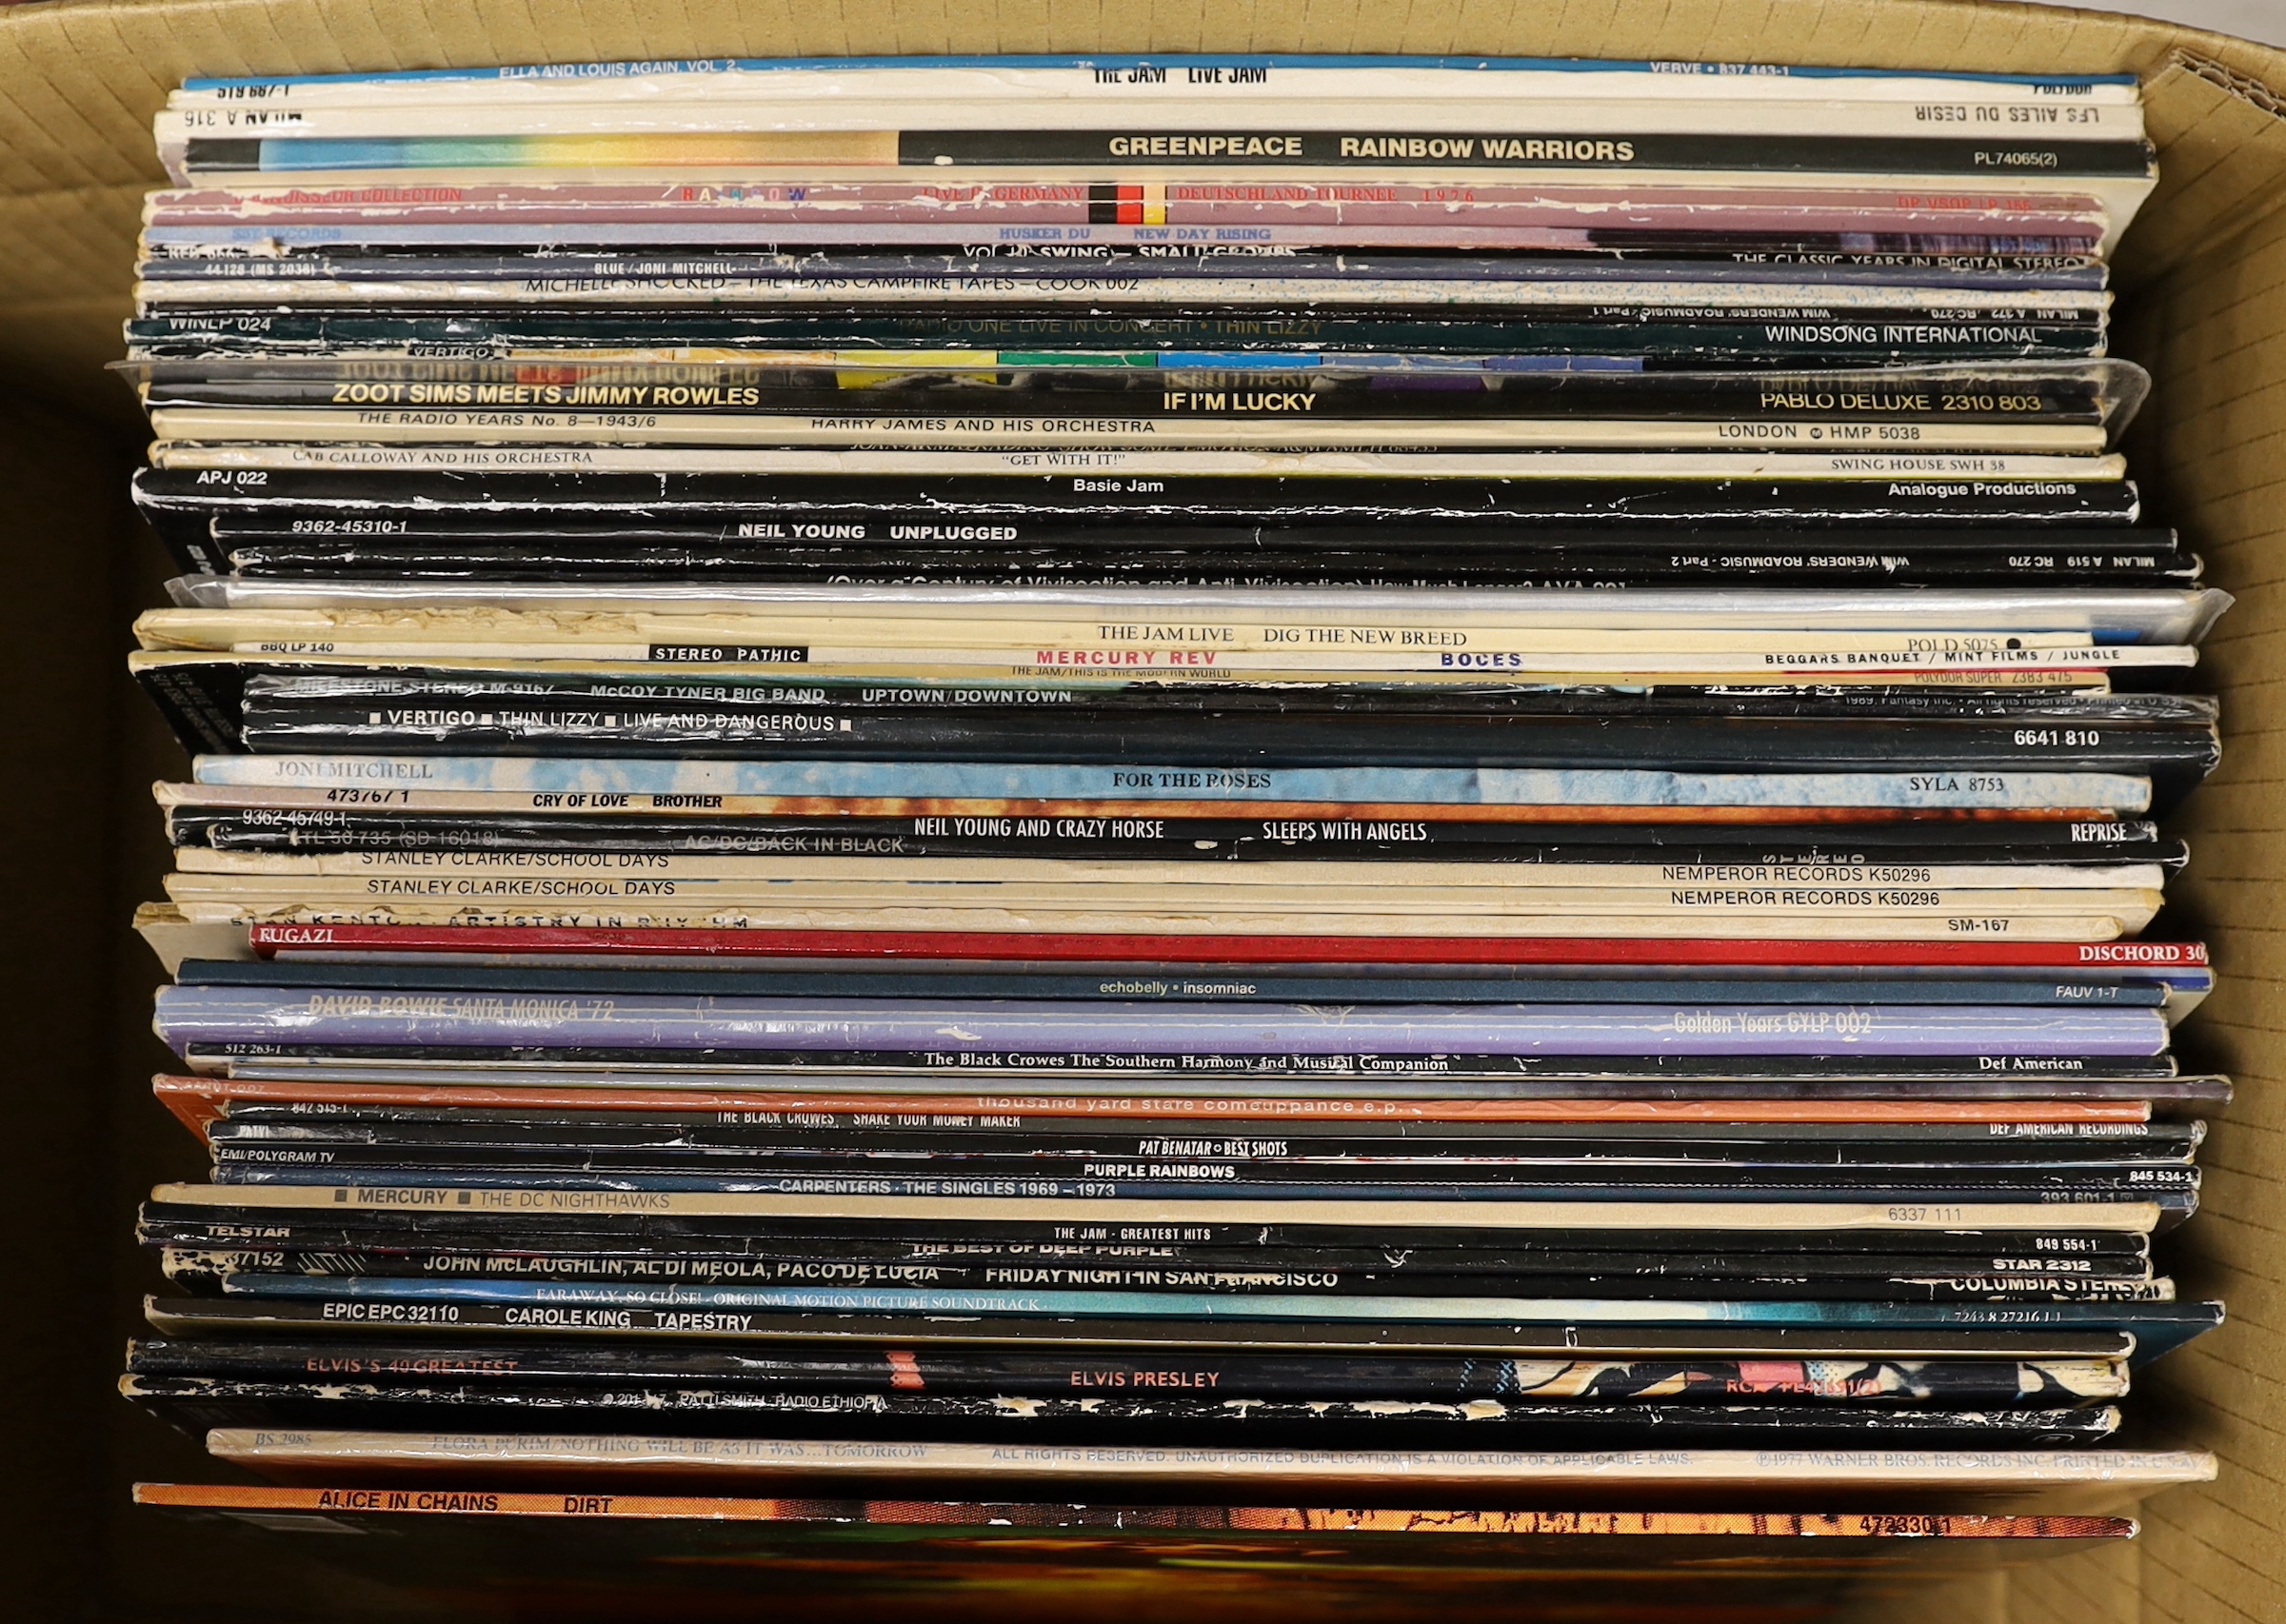 Fifty-five mainly 80's and 90's LPs, including, The Jam, Joan Armatrading, Neil Young, Mercury Rev, Thin Lizzy, Joni Mitchell, AC/DC, David Bowie, The Carpenters, Alice In Chains, etc